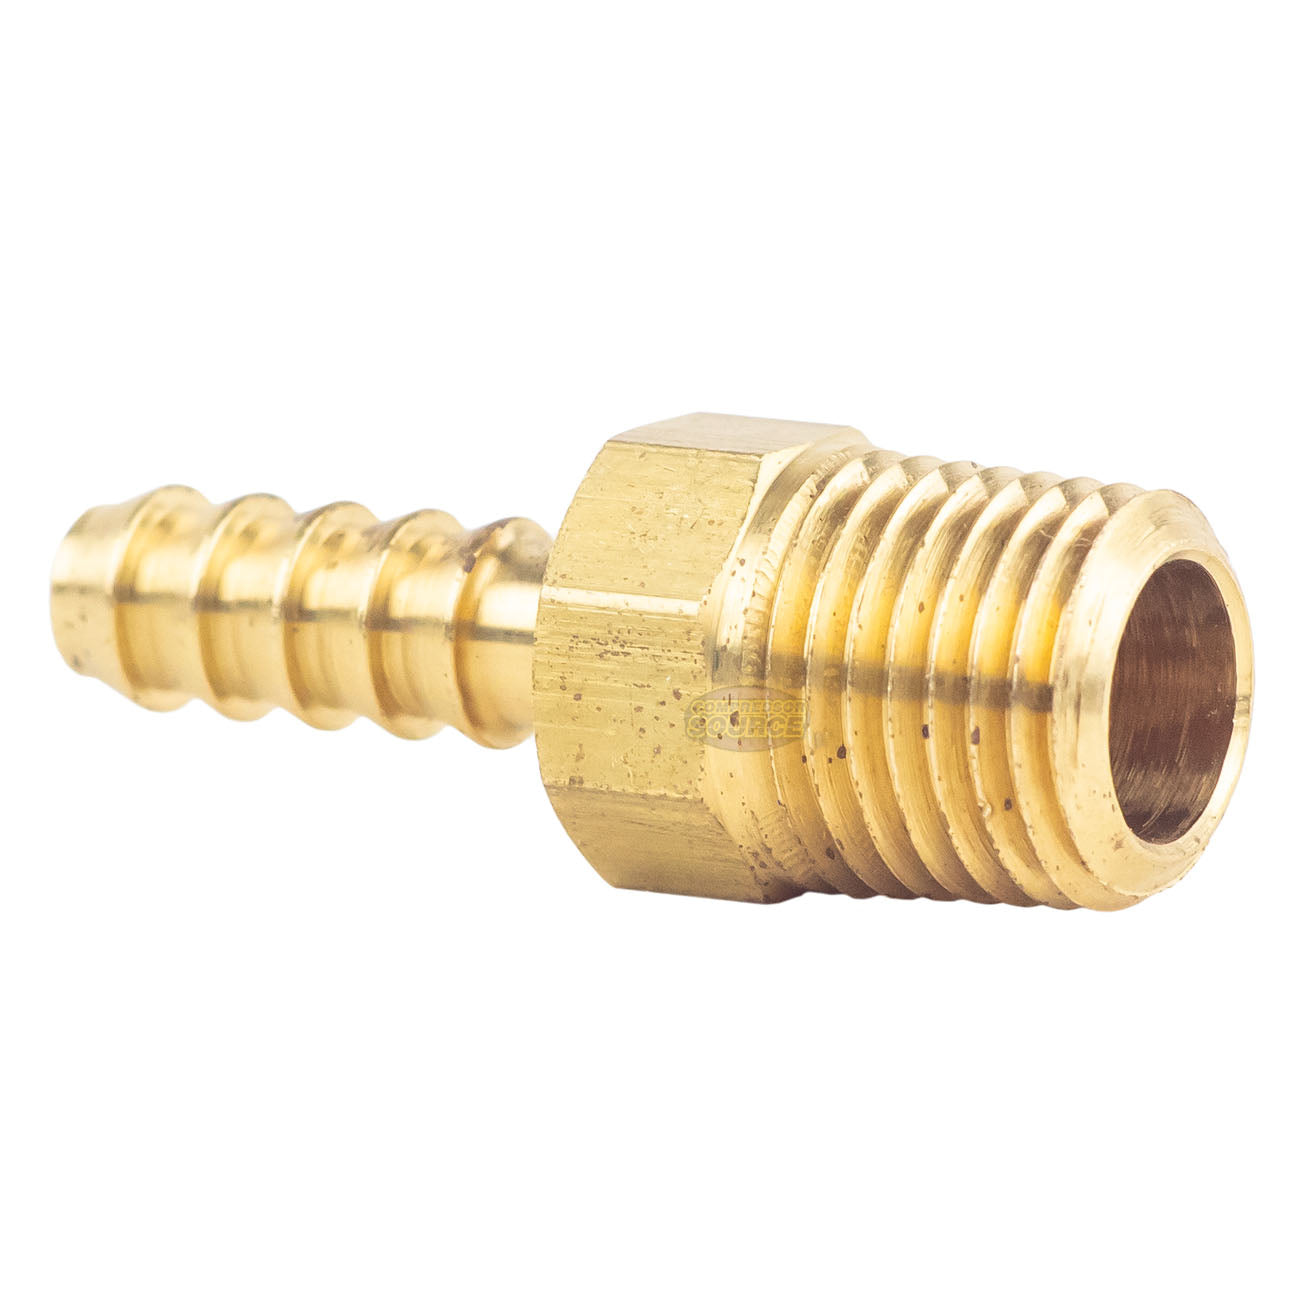 Brass Hose Barb 1/4" Male NPT for 1/4" ID Hoses Barbed Fitting Air Fuel Water